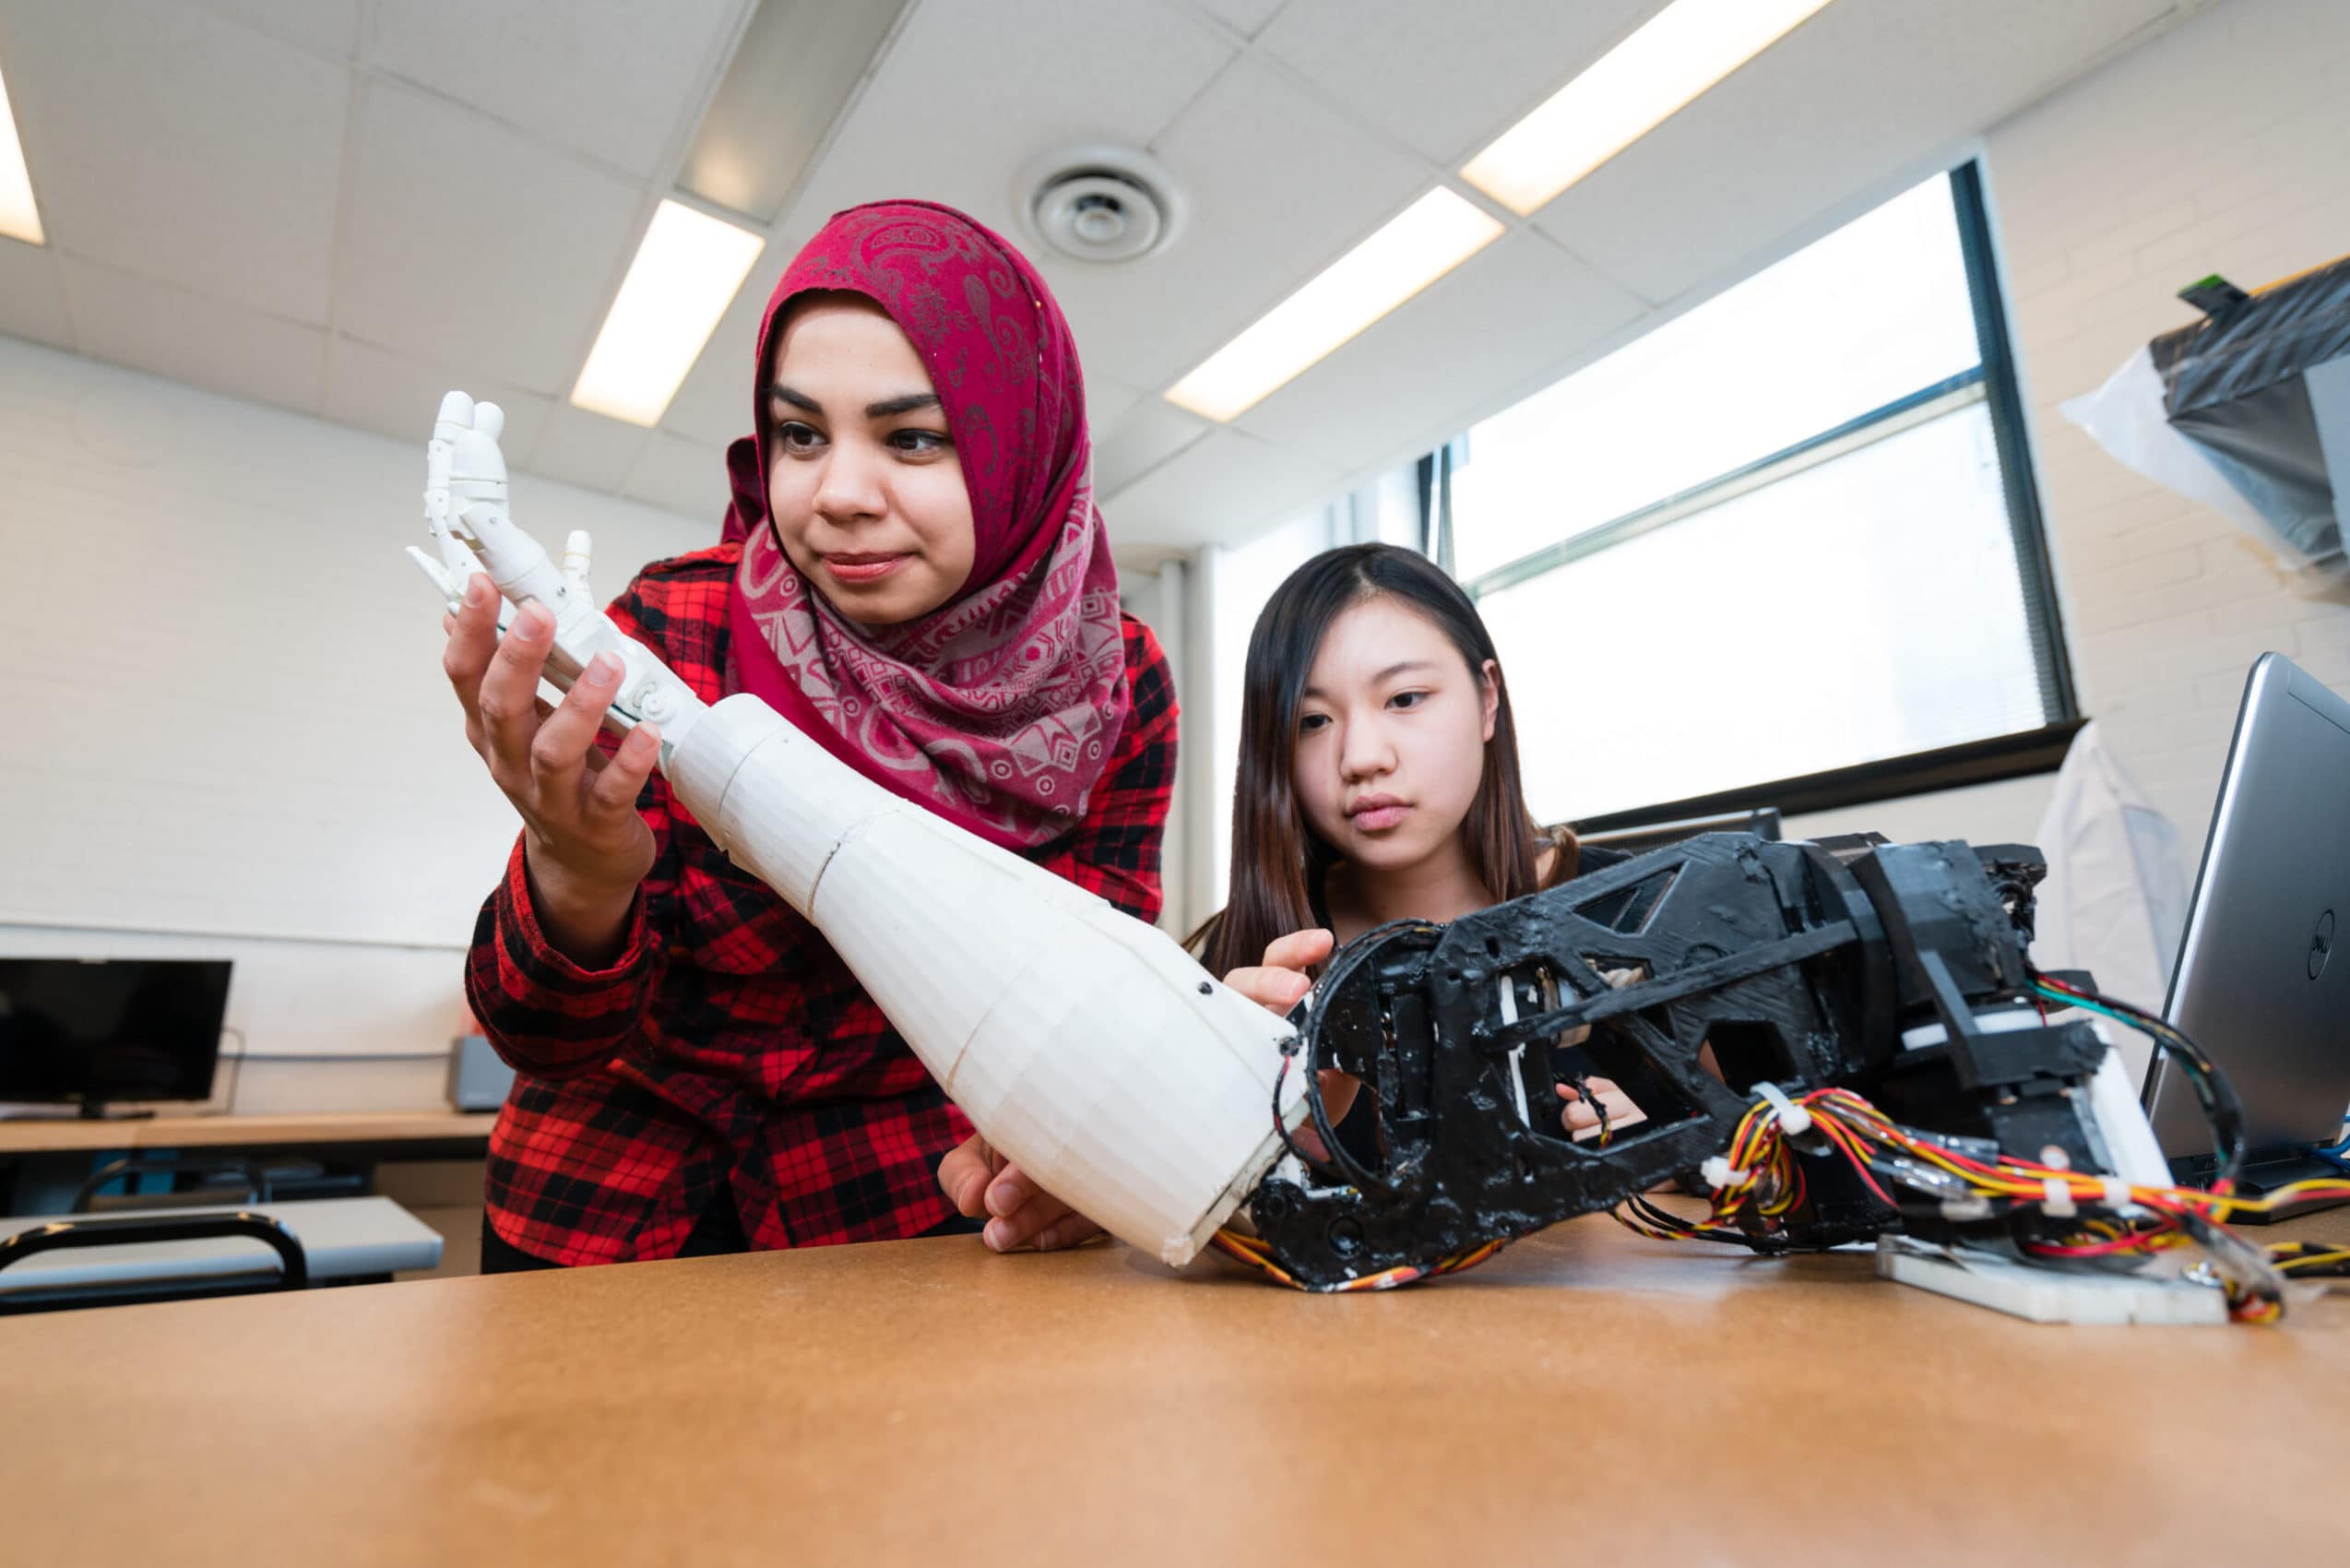 An image of 2 young women looking at a robotic arm: the image is next to the mentorship opportunities link.